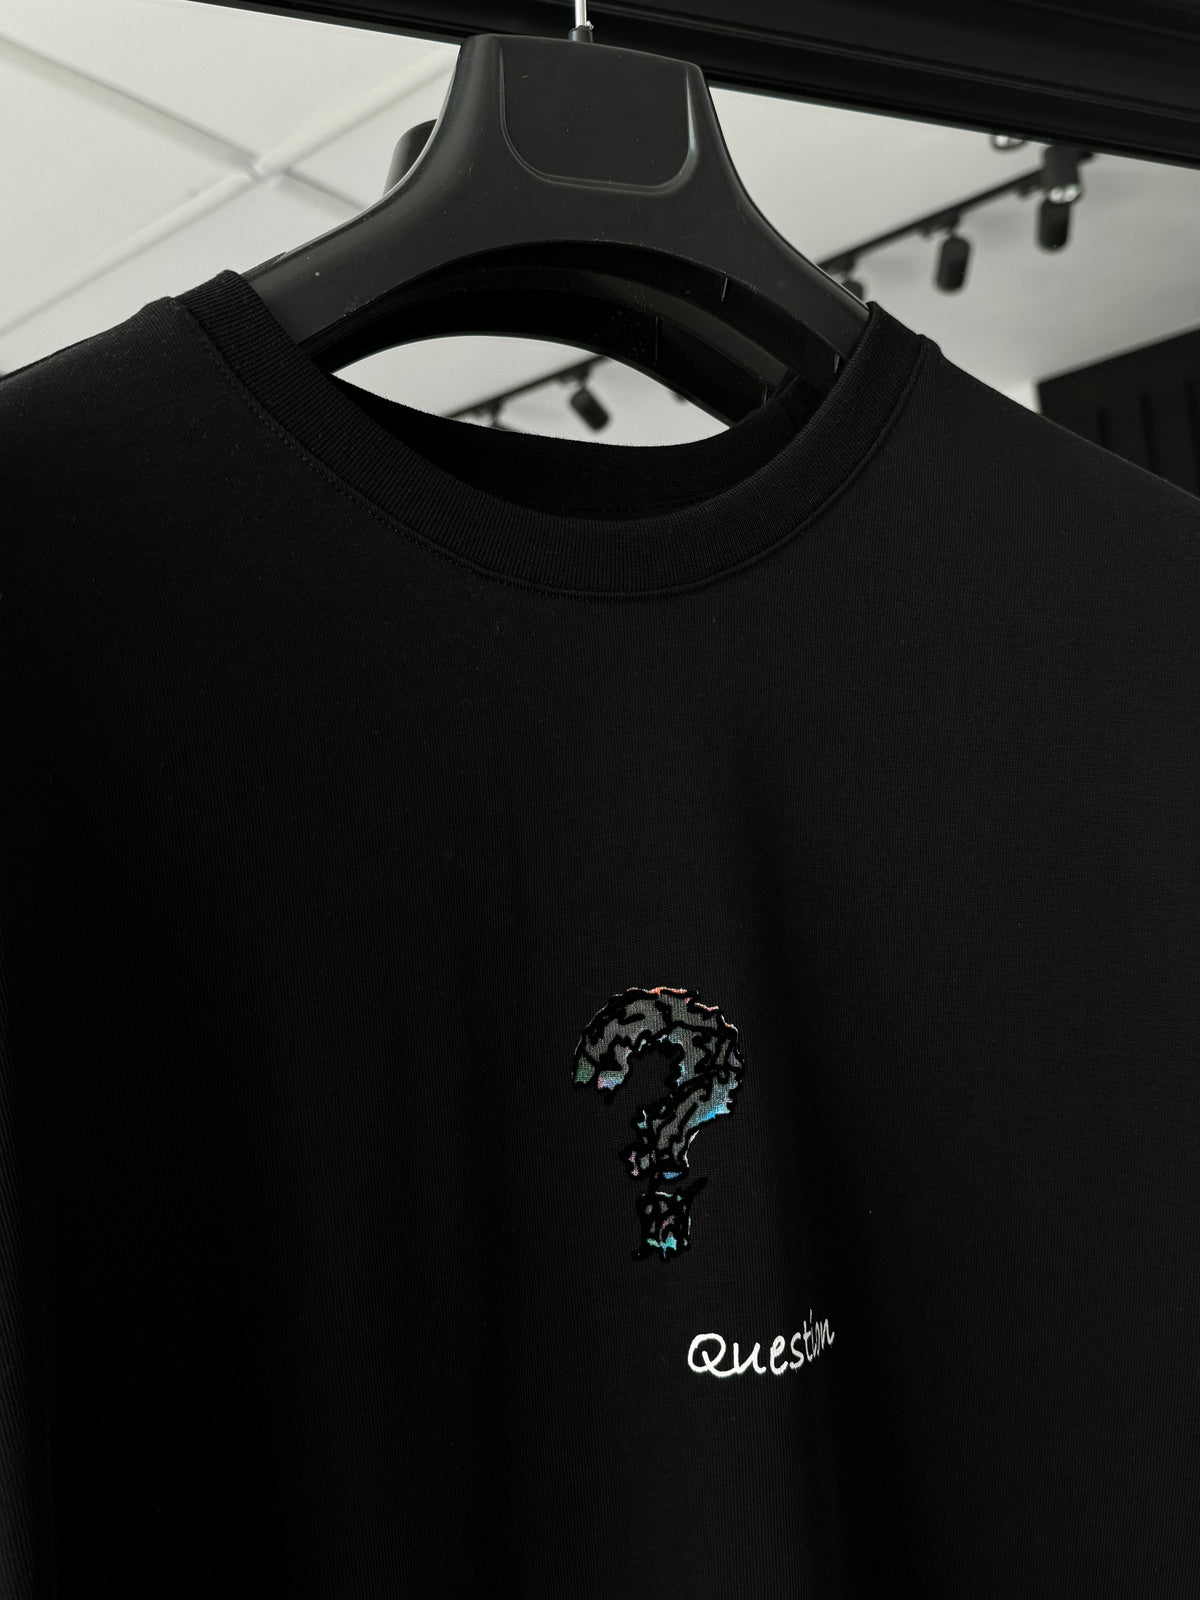 Black "Question" Printed Oversize T-Shirt